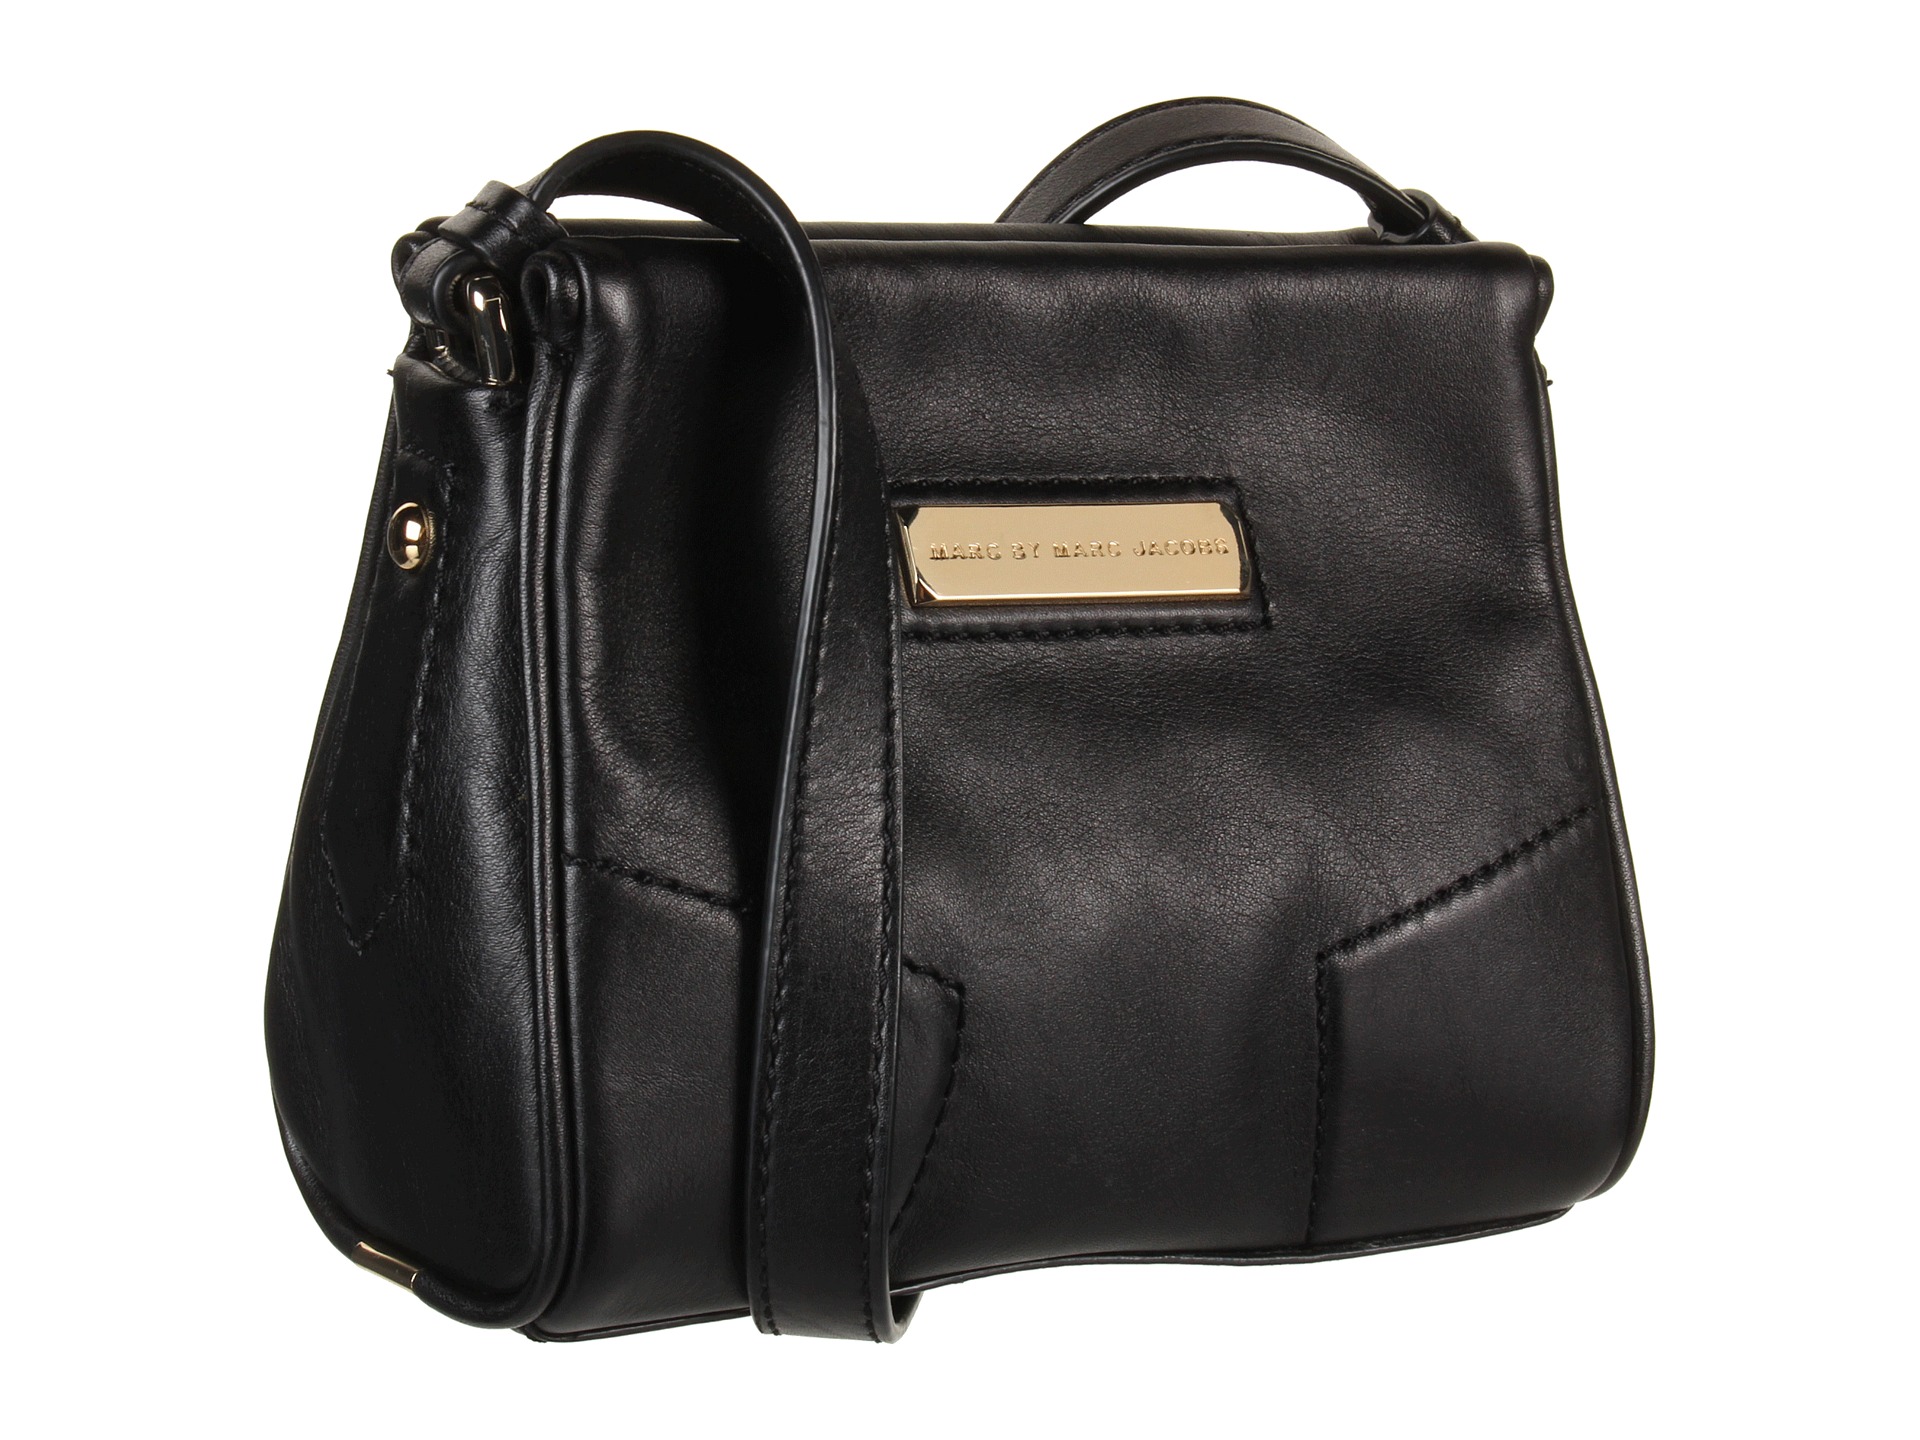 Marc by Marc Jacobs   Padded Leather Crossbody